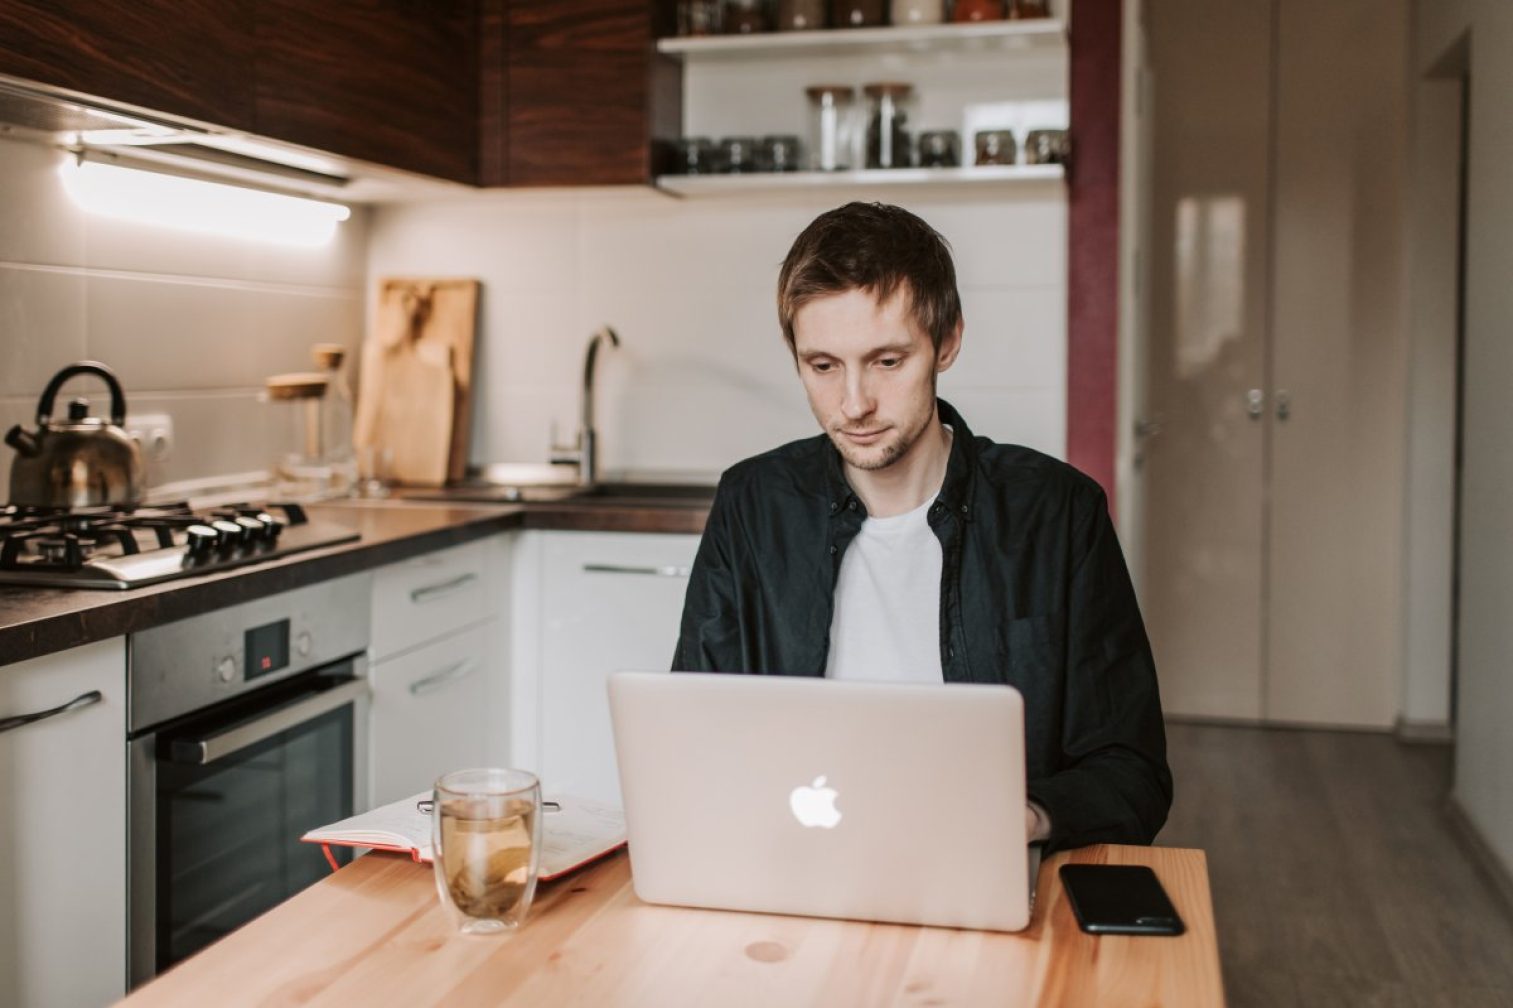 Thoughtful male student working on laptop in kitchen at home